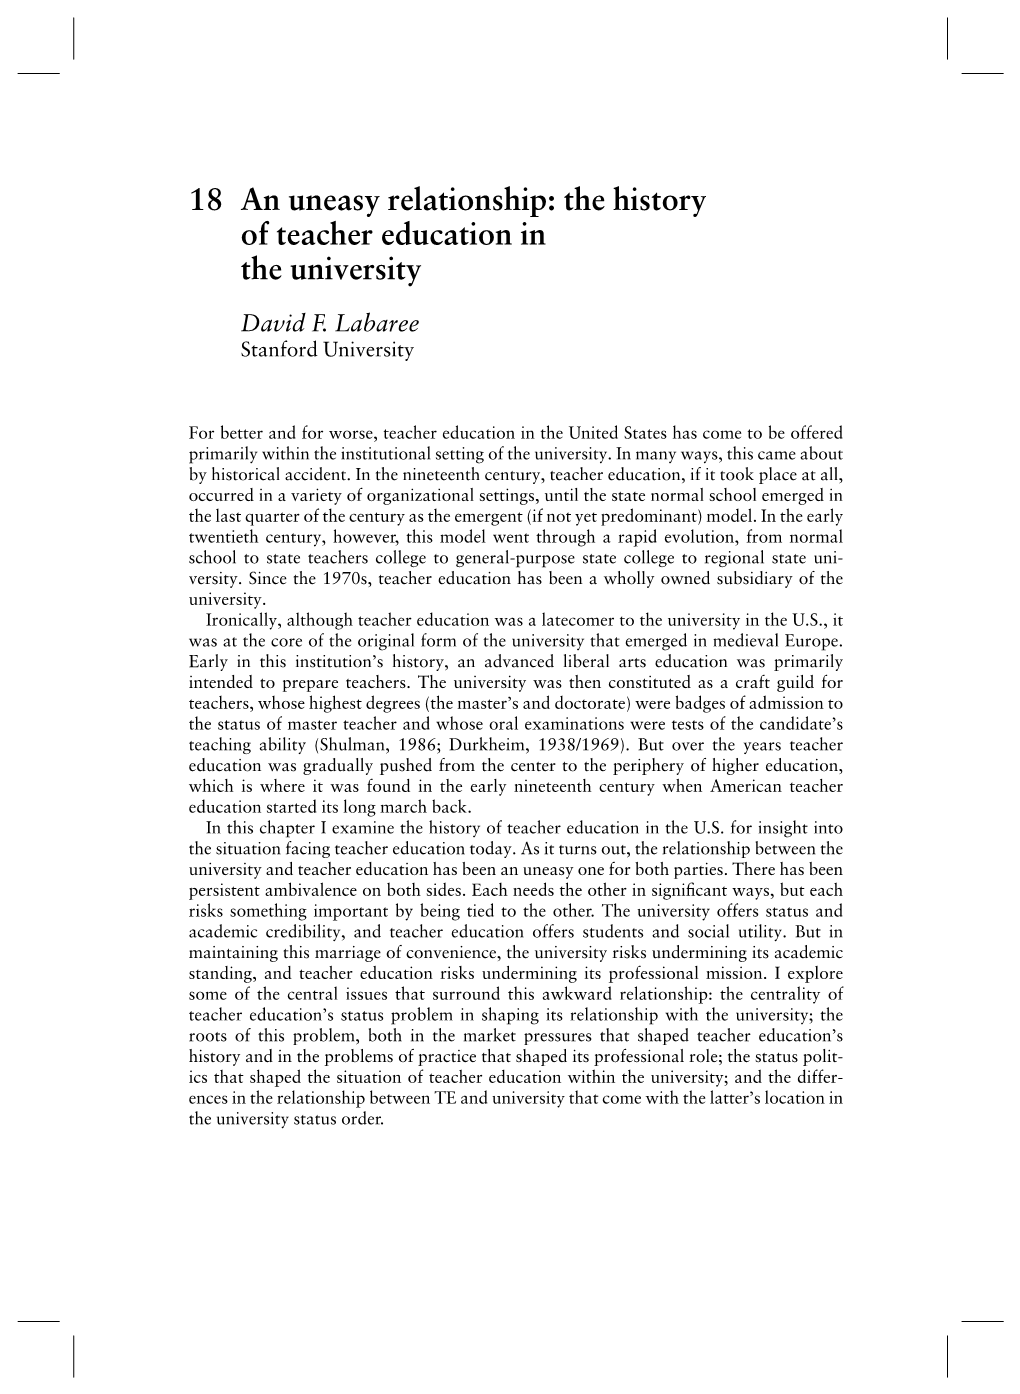 18 an Uneasy Relationship: the History of Teacher Education in the University